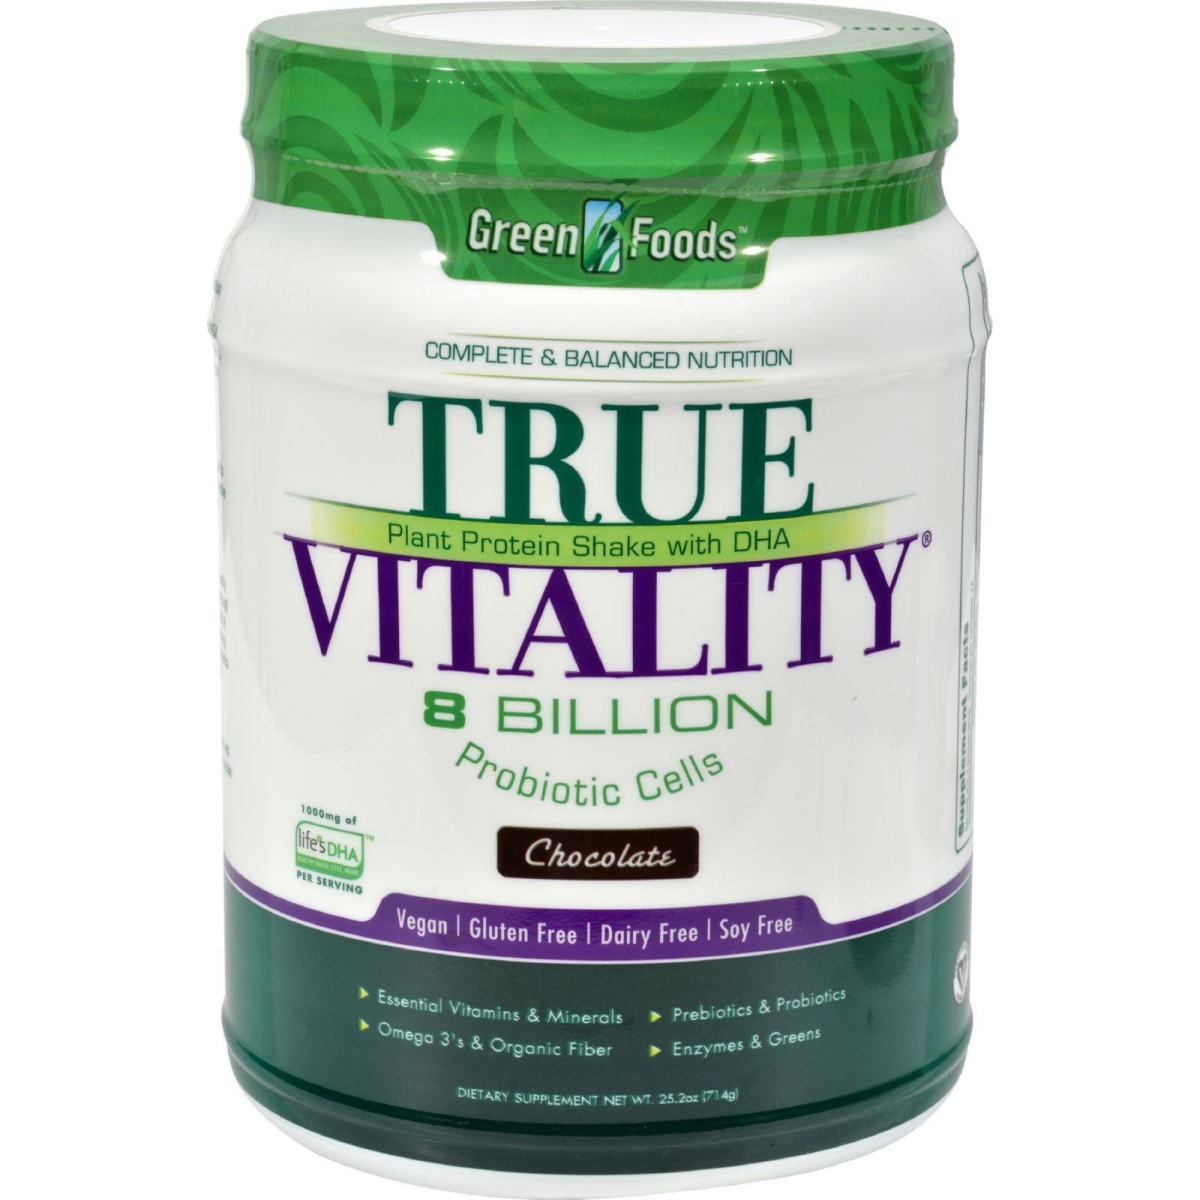 Hg0928333 25.2 Oz True Vitality Plant Protein Shake With Dha Chocolate